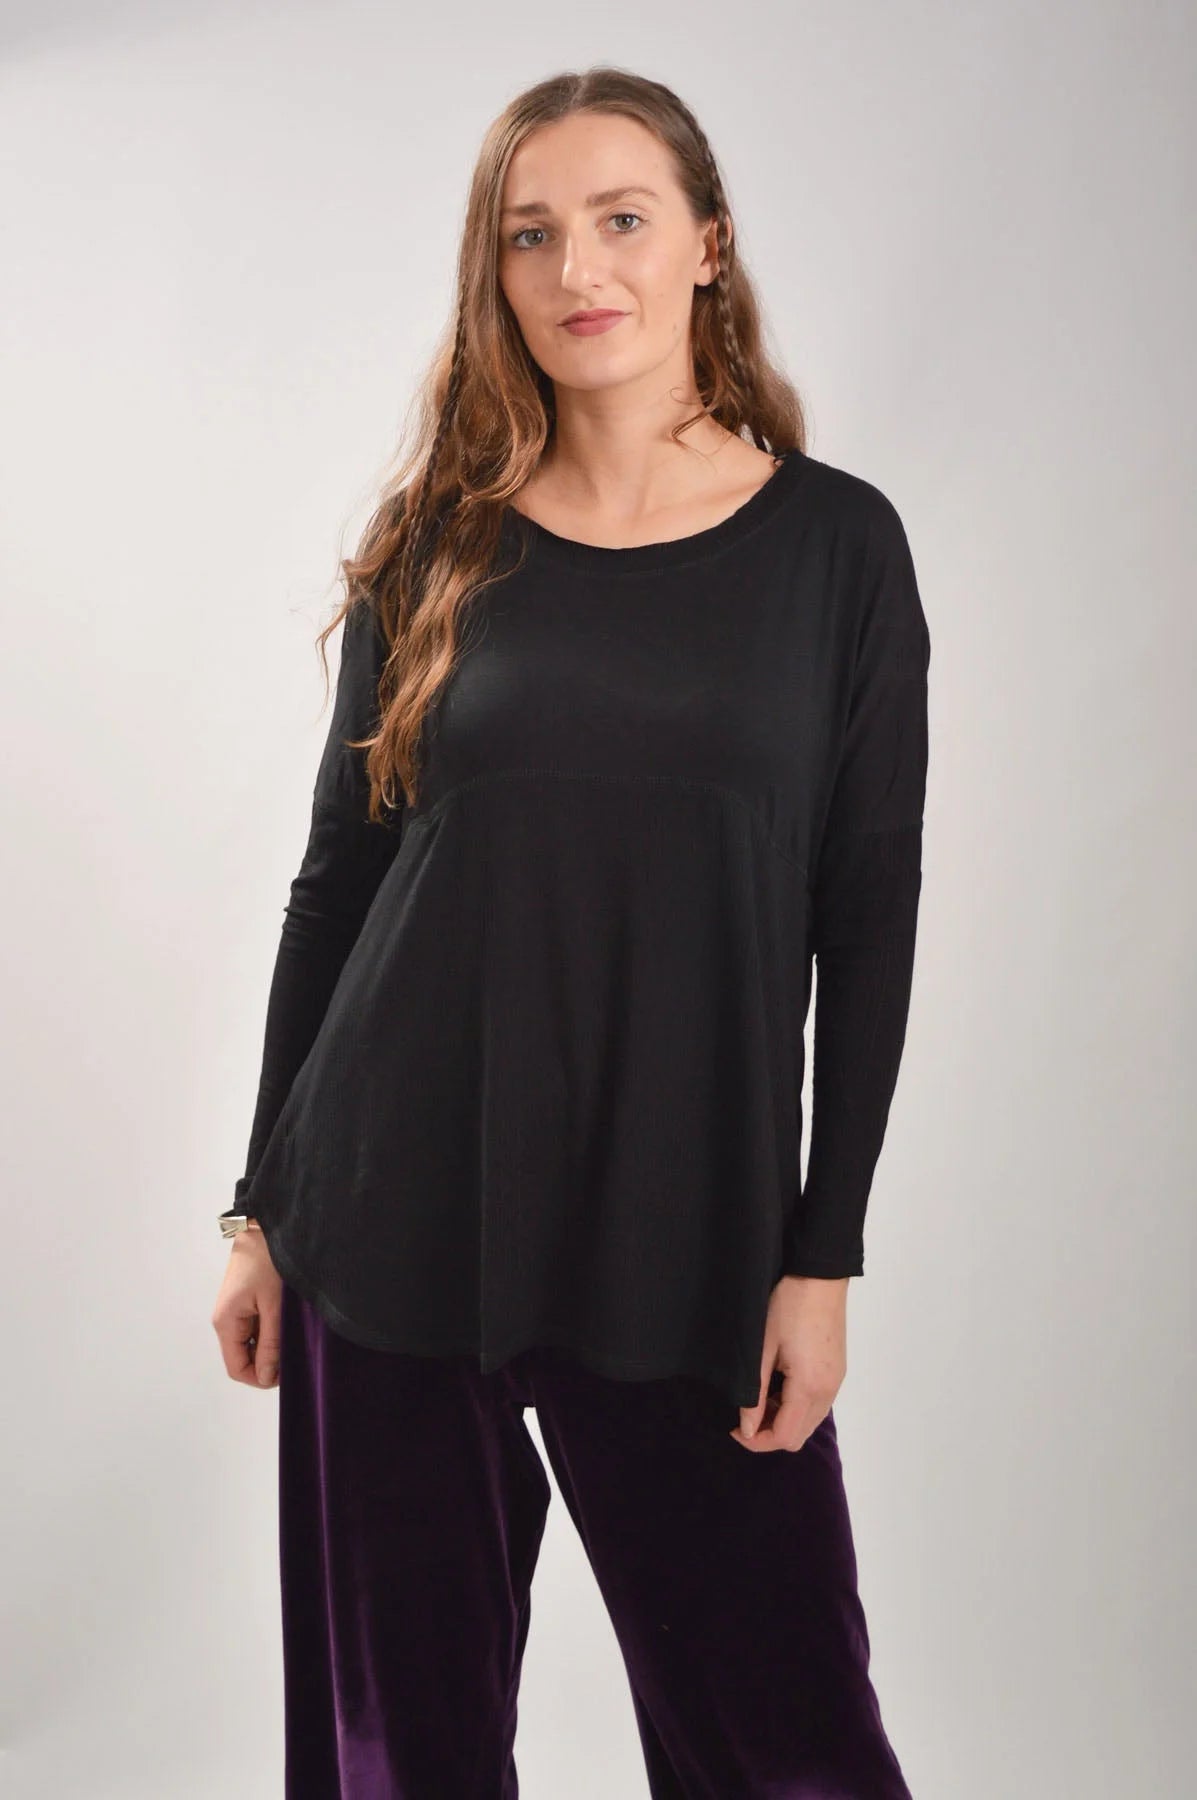 Urban Outfitters Rib Mix Top Black / XS